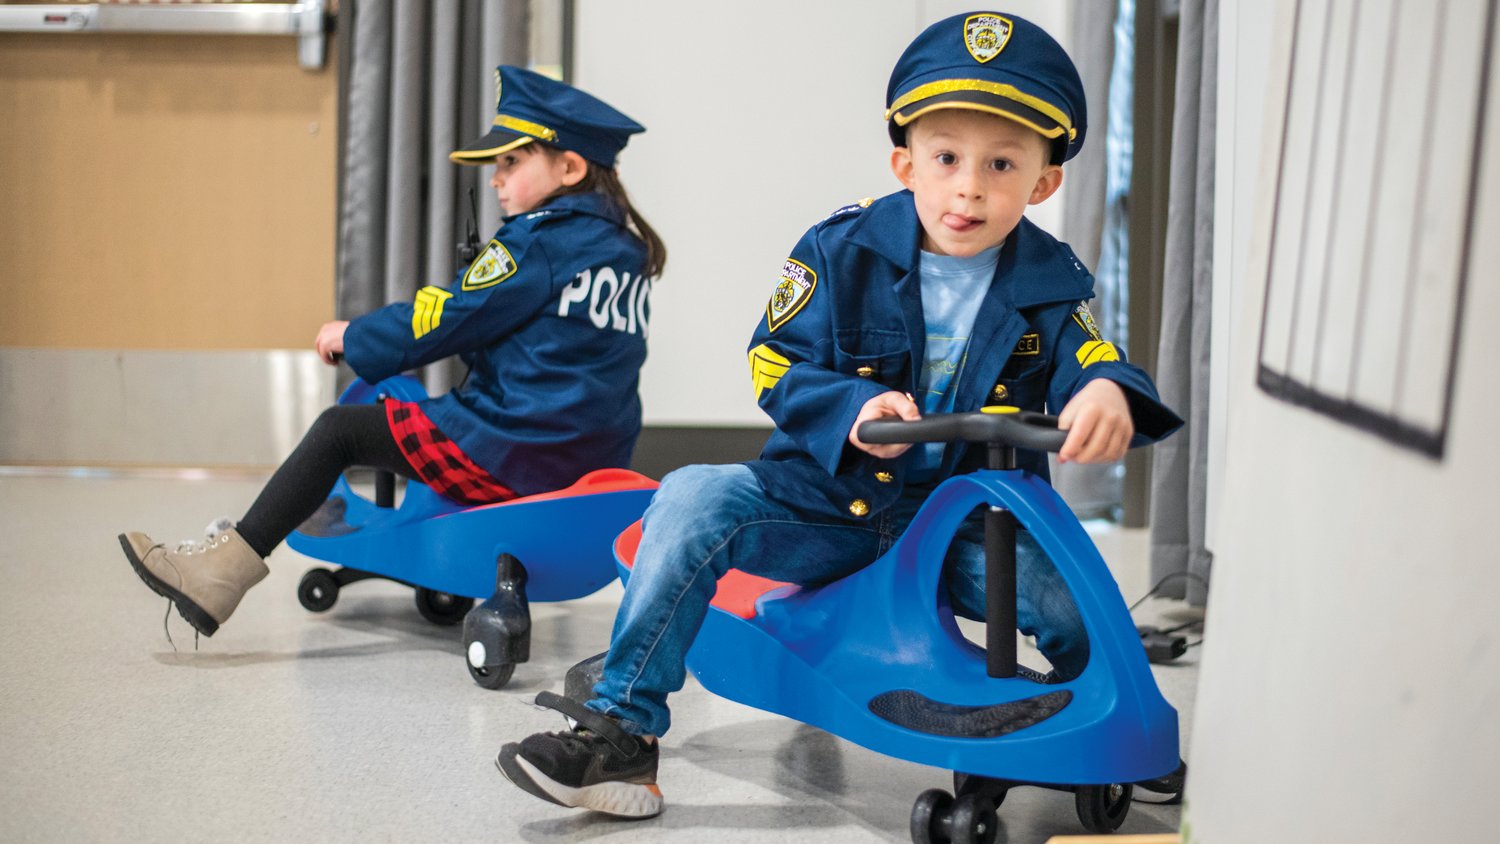 Skylar Wiemann and Cole West, kindergarten students at  James W. Lintott Elementary School, sport police uniforms in Scooter Town Tuesday morning.